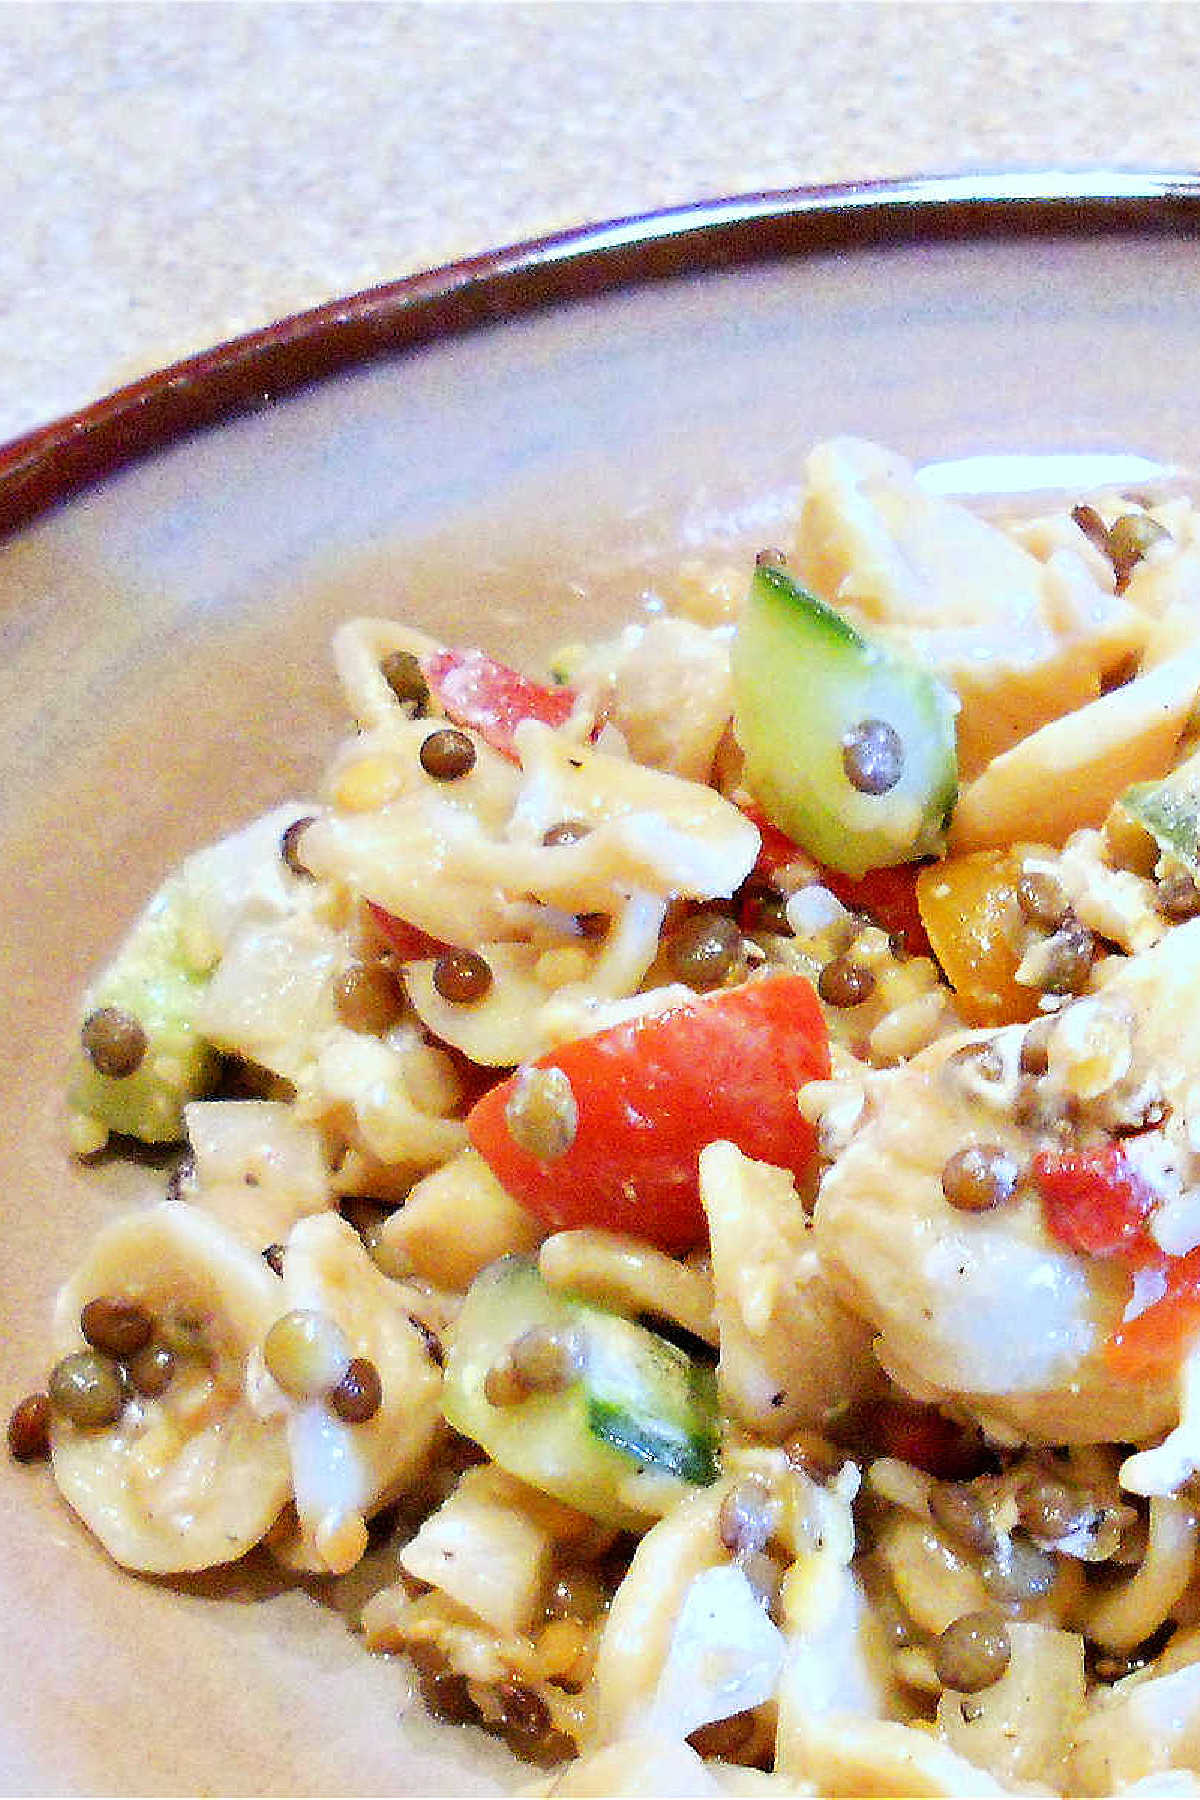 A Closeup view of pasta salad with lentils, chickpeas, and tomatoes on a plate.